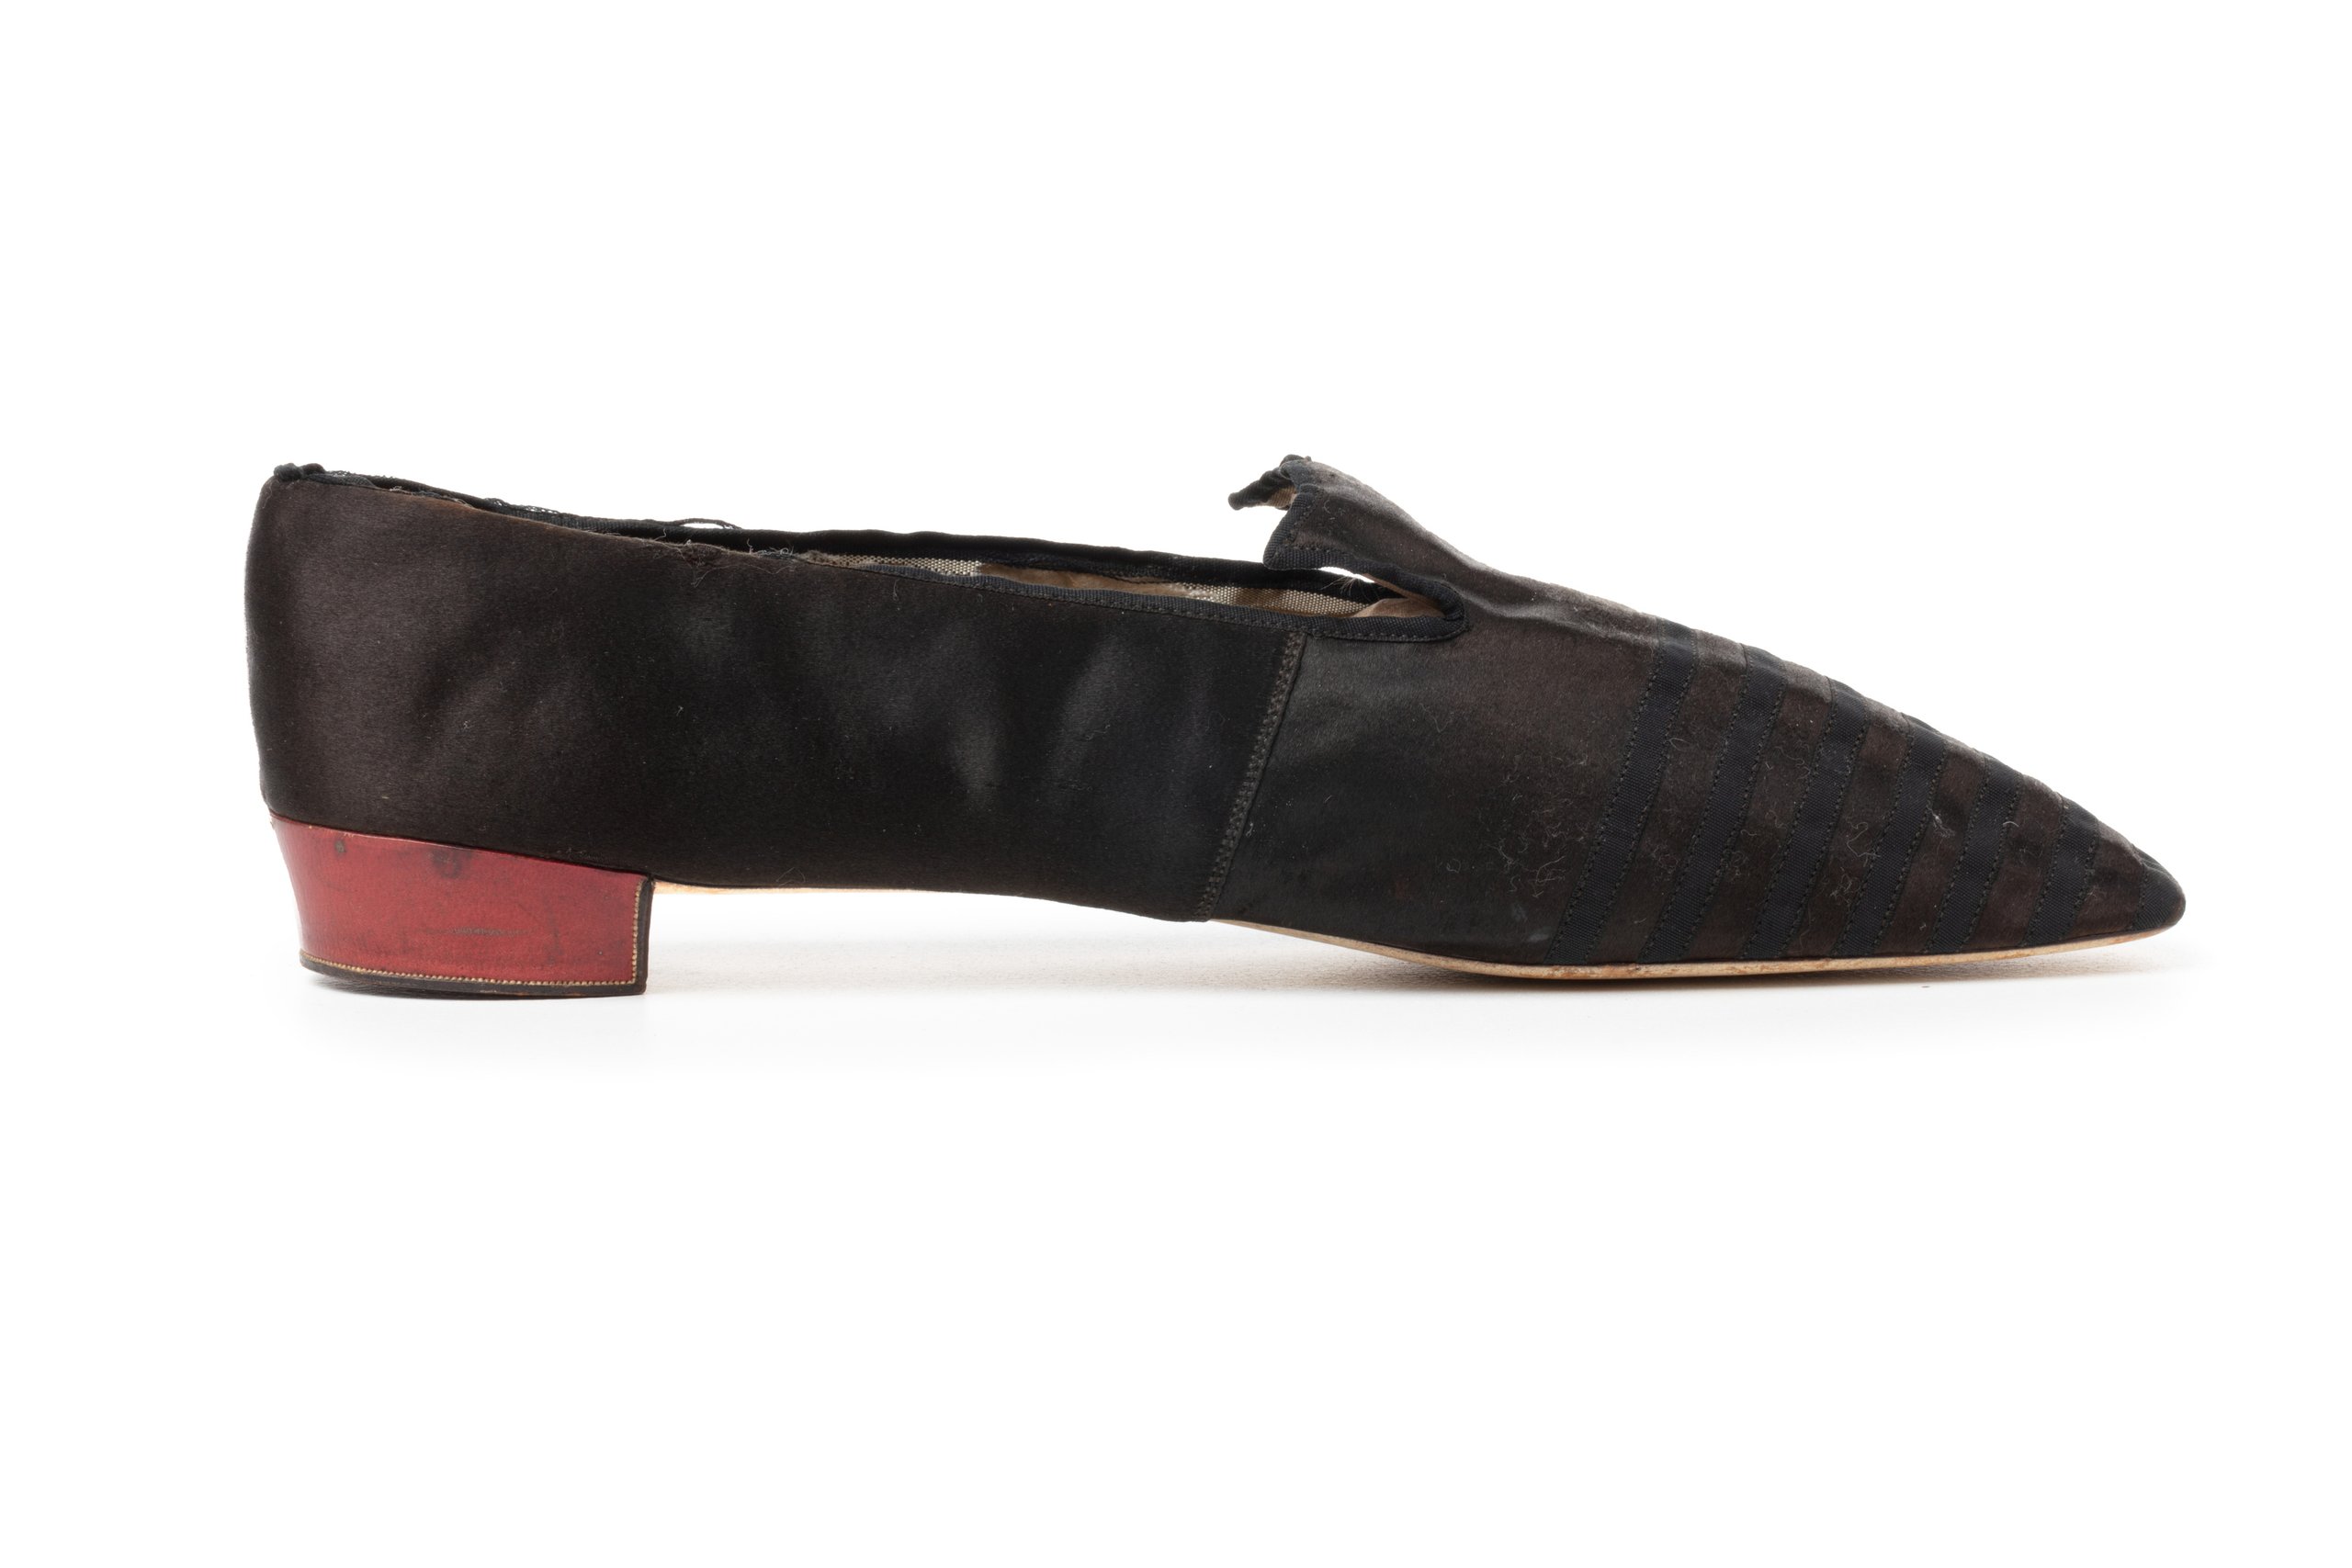 Tabbed shoe from the Joseph Box collection